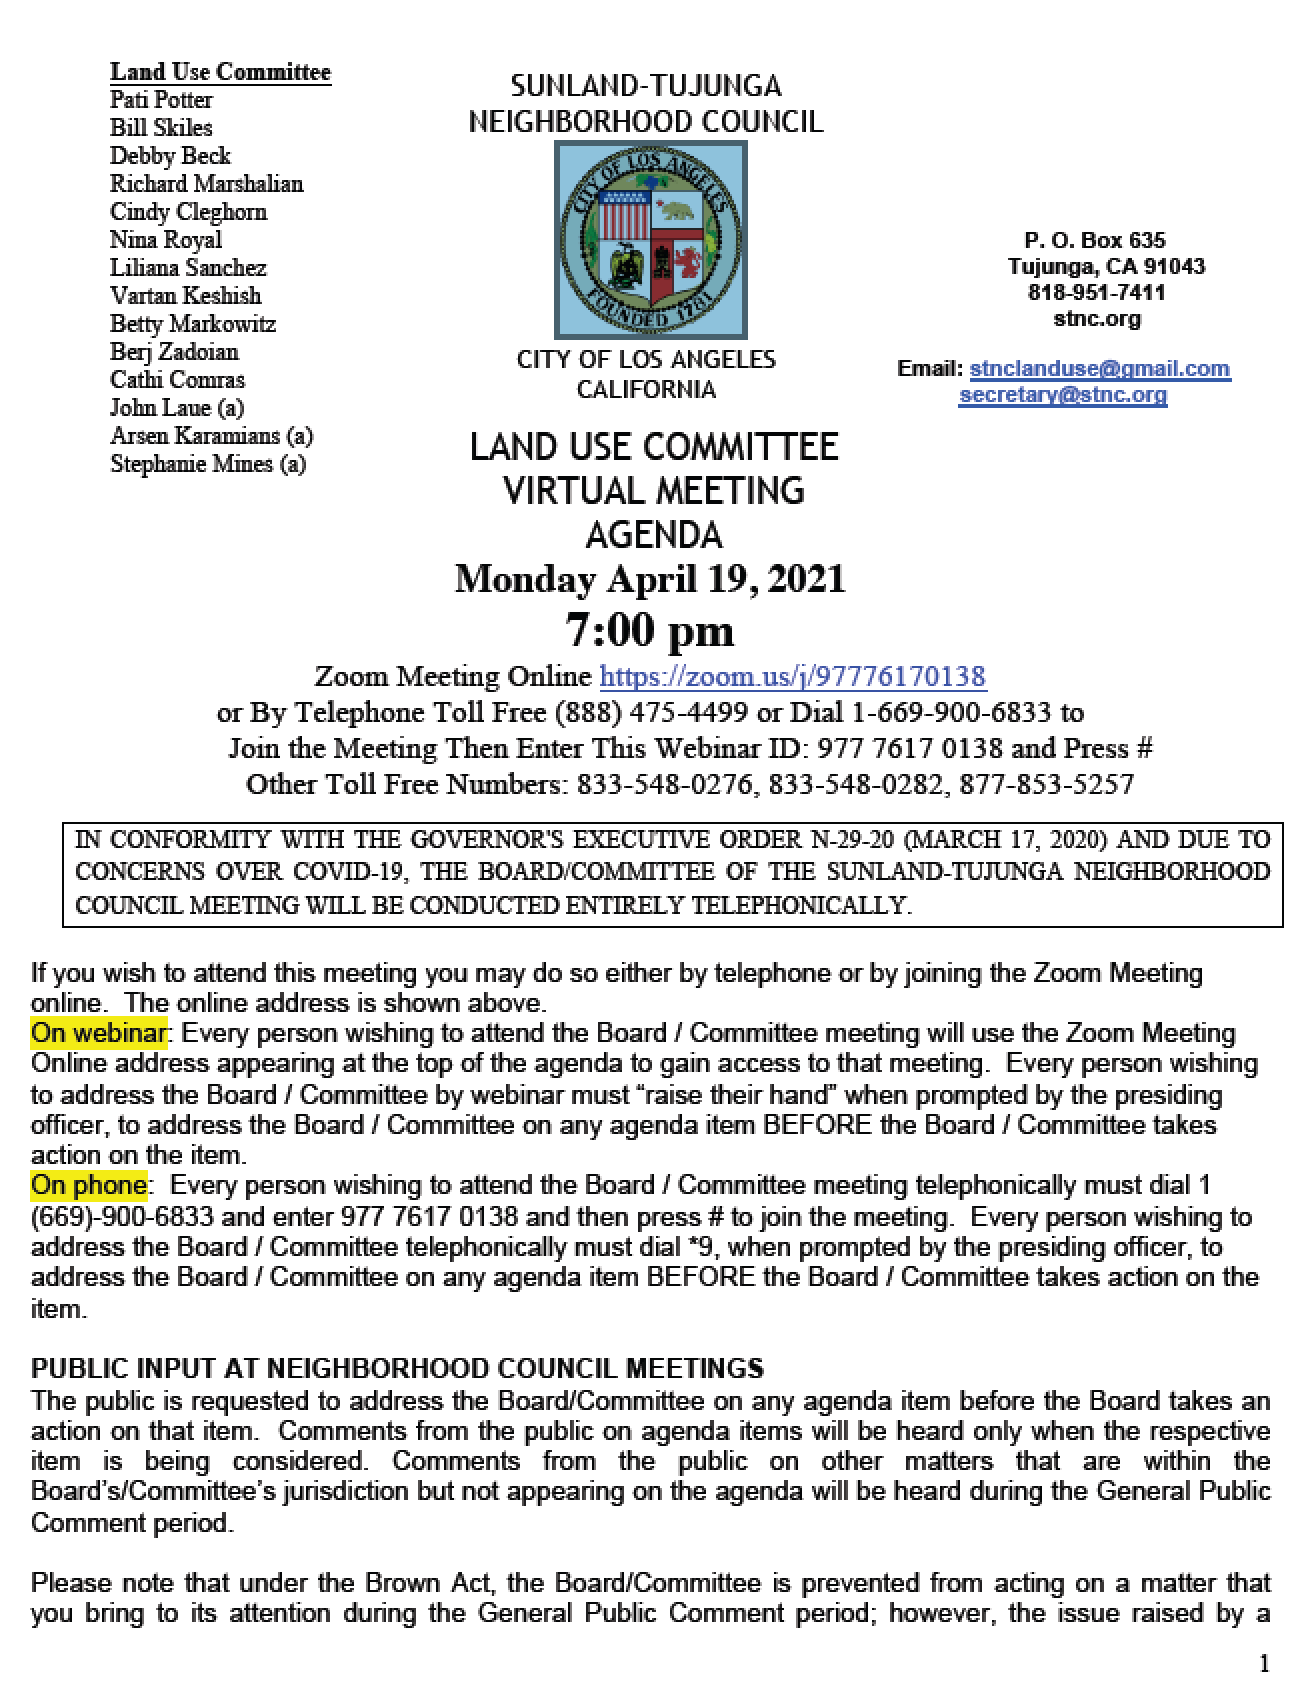 STNC Land Use Committee Meeting Monday, April 19 